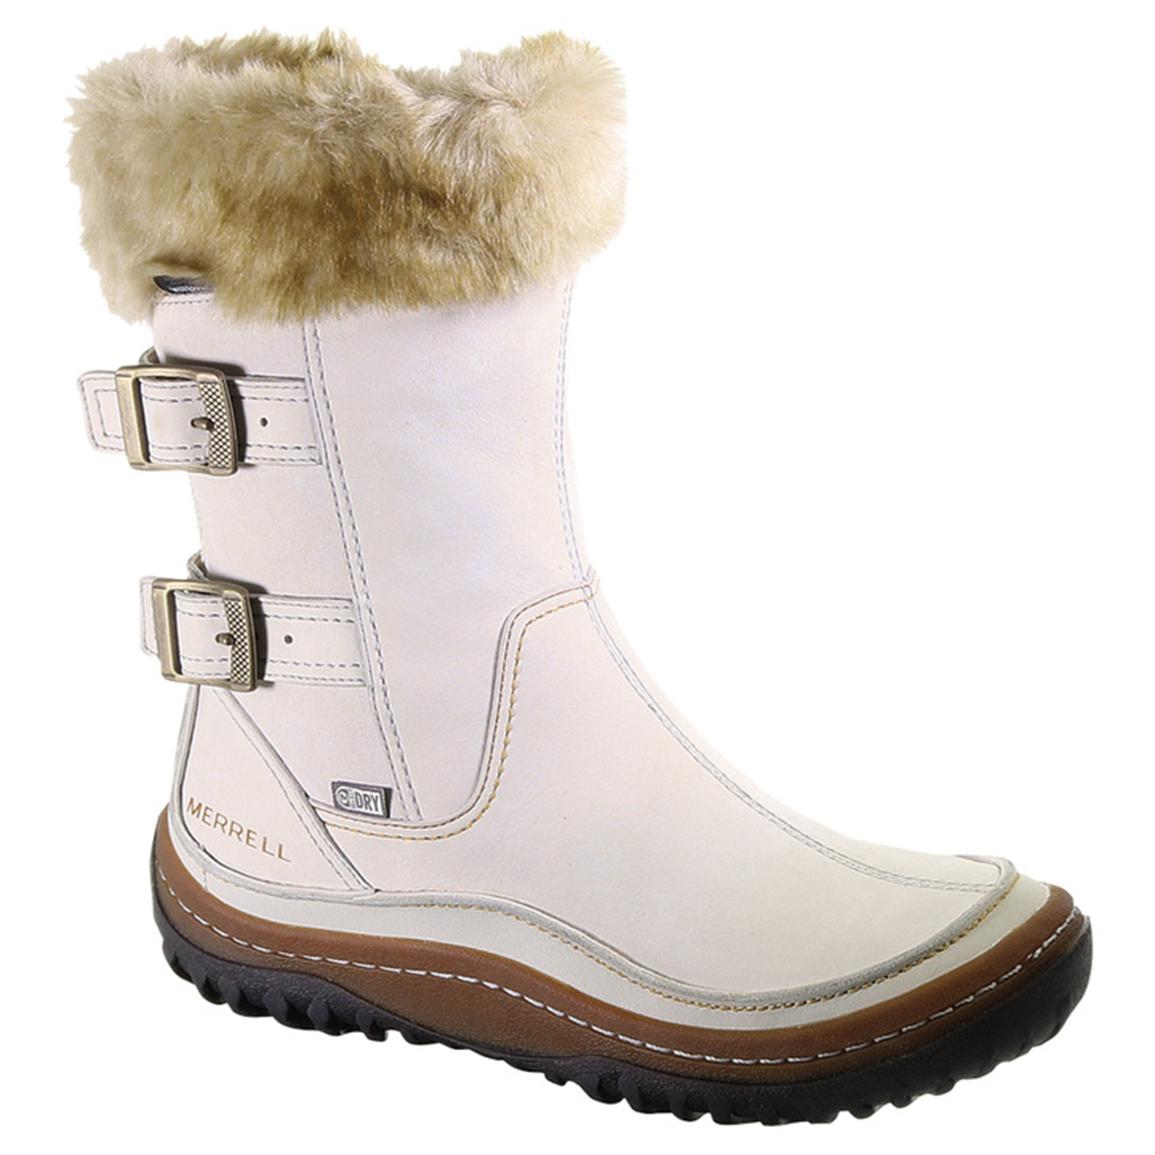 What Are The Best Womens Winter Boots - Best Design Idea